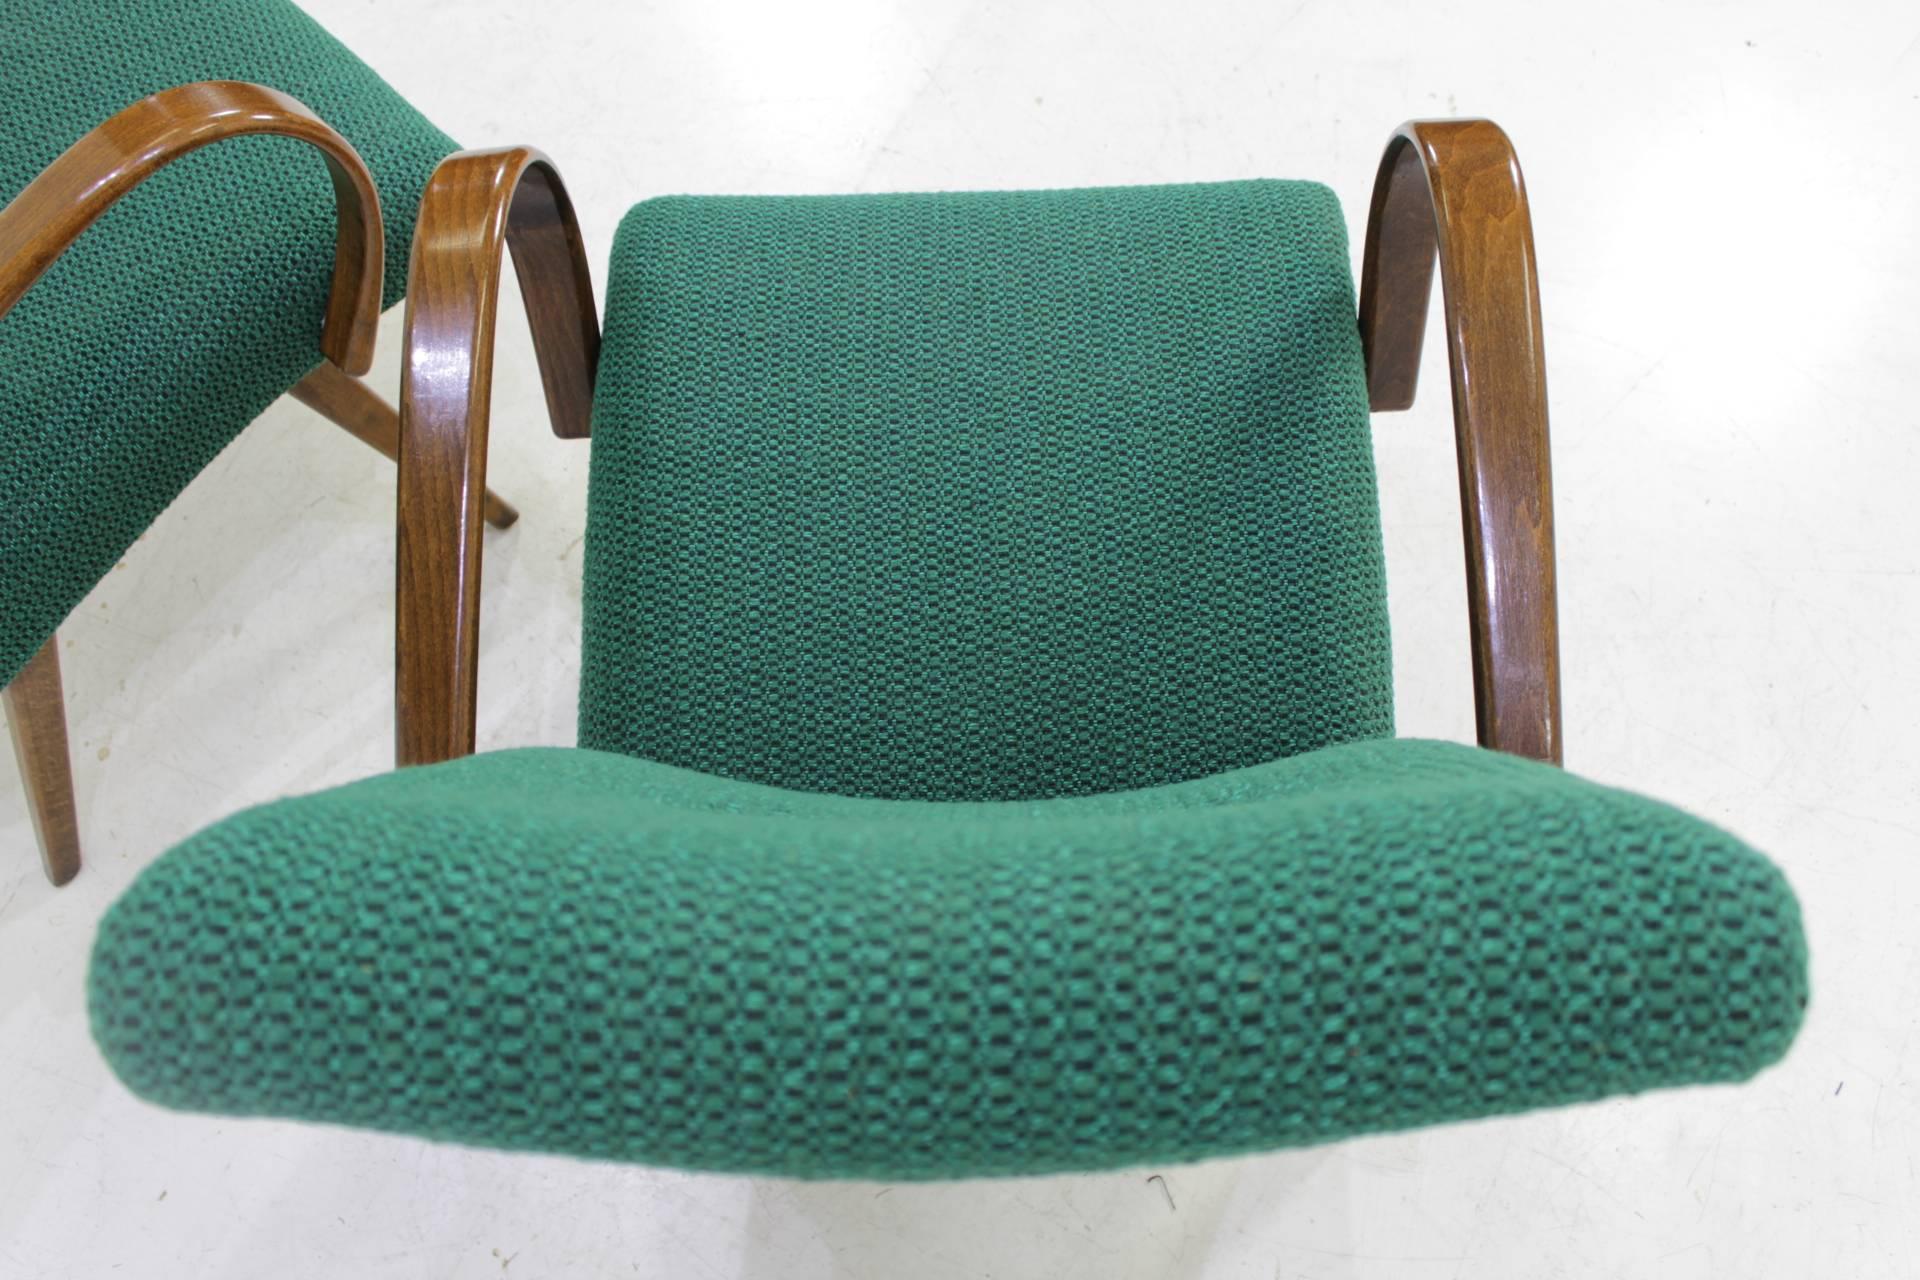 Czech 1960 Thon or Thonet Bentwood Lounge Chair